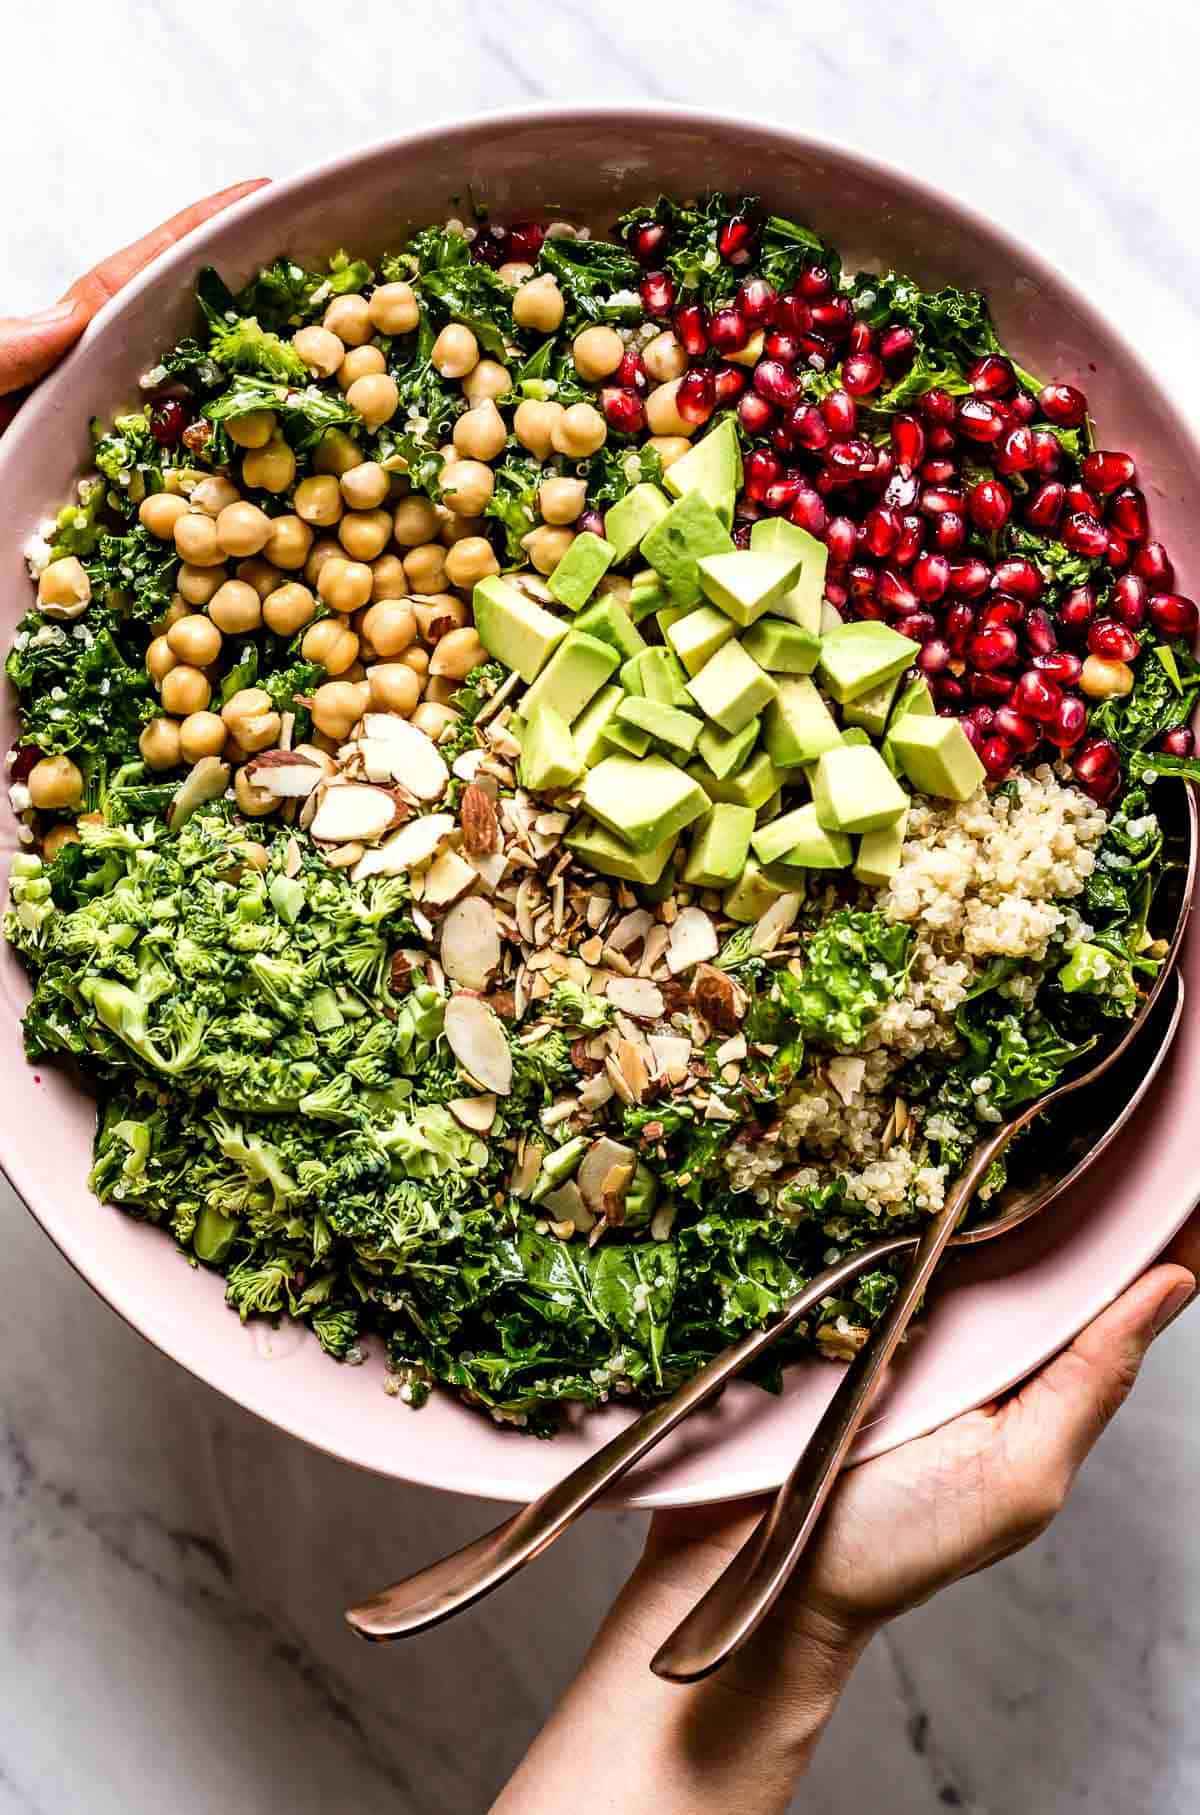 Quinoa and Kale salad served in a bowl by a person from the top view.